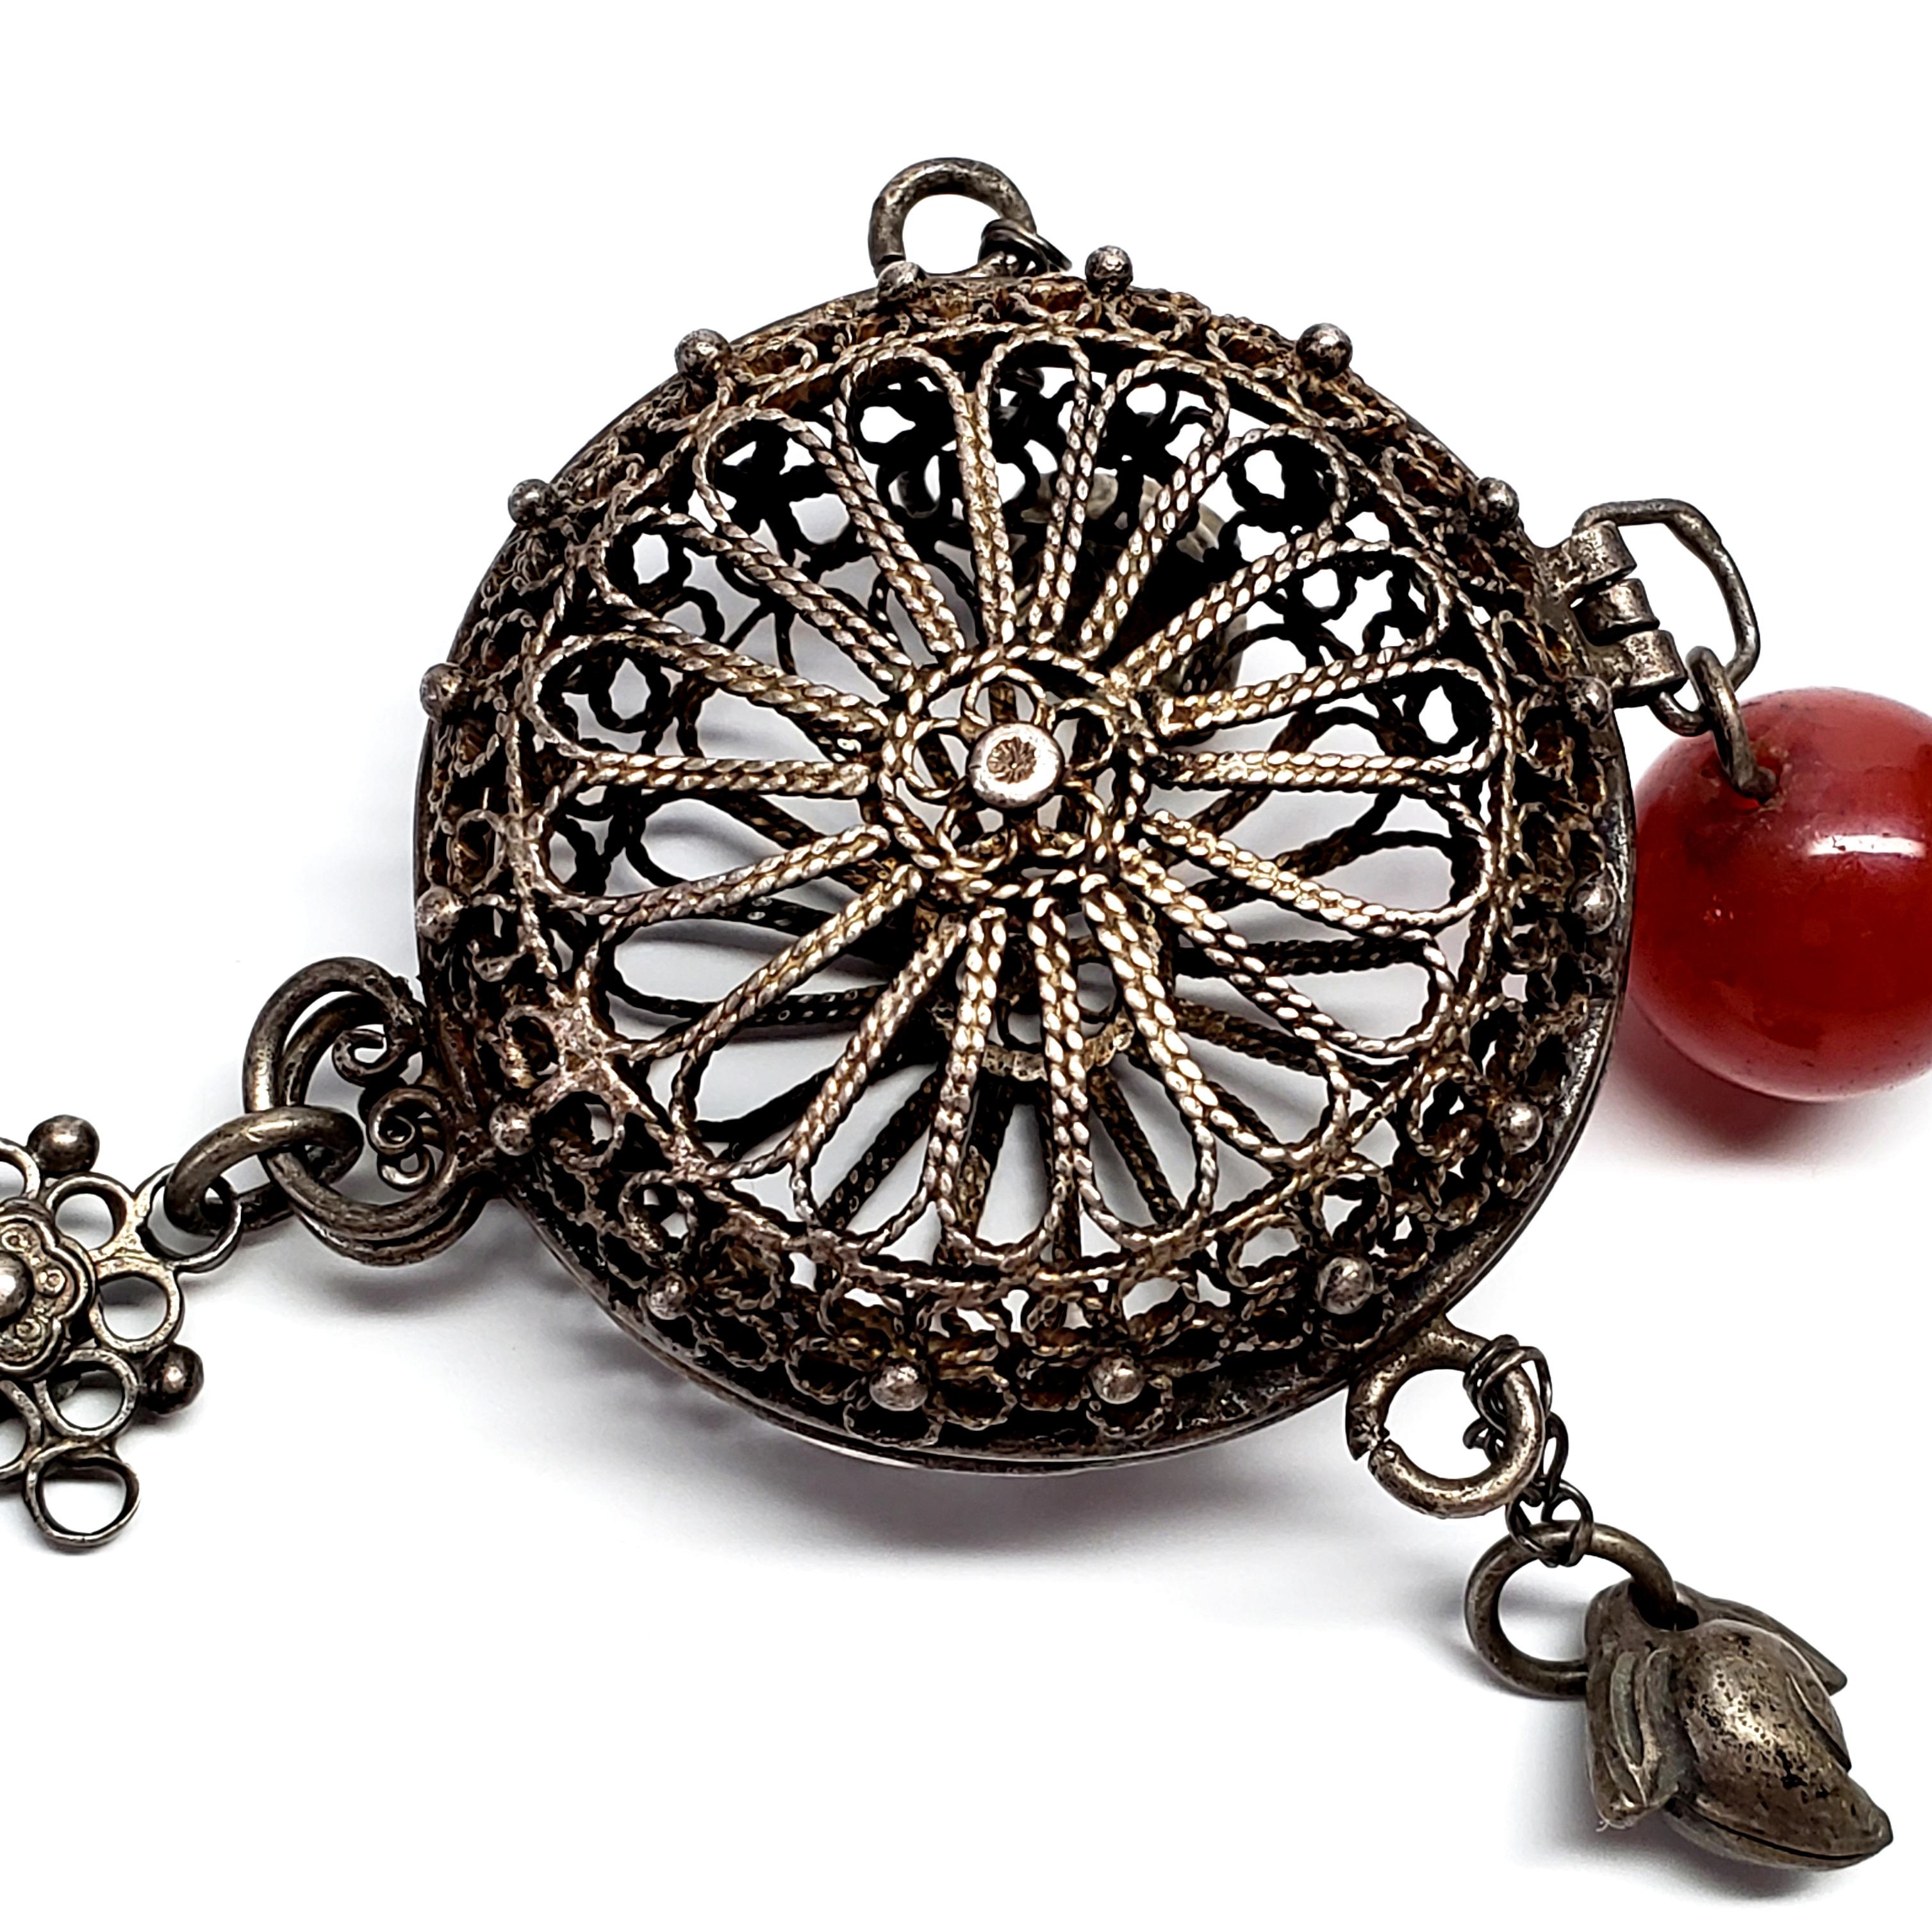 Chinese Silver Chatelaine Filigree Cricket Cage Vinaigrette with Carnelian Bead 2